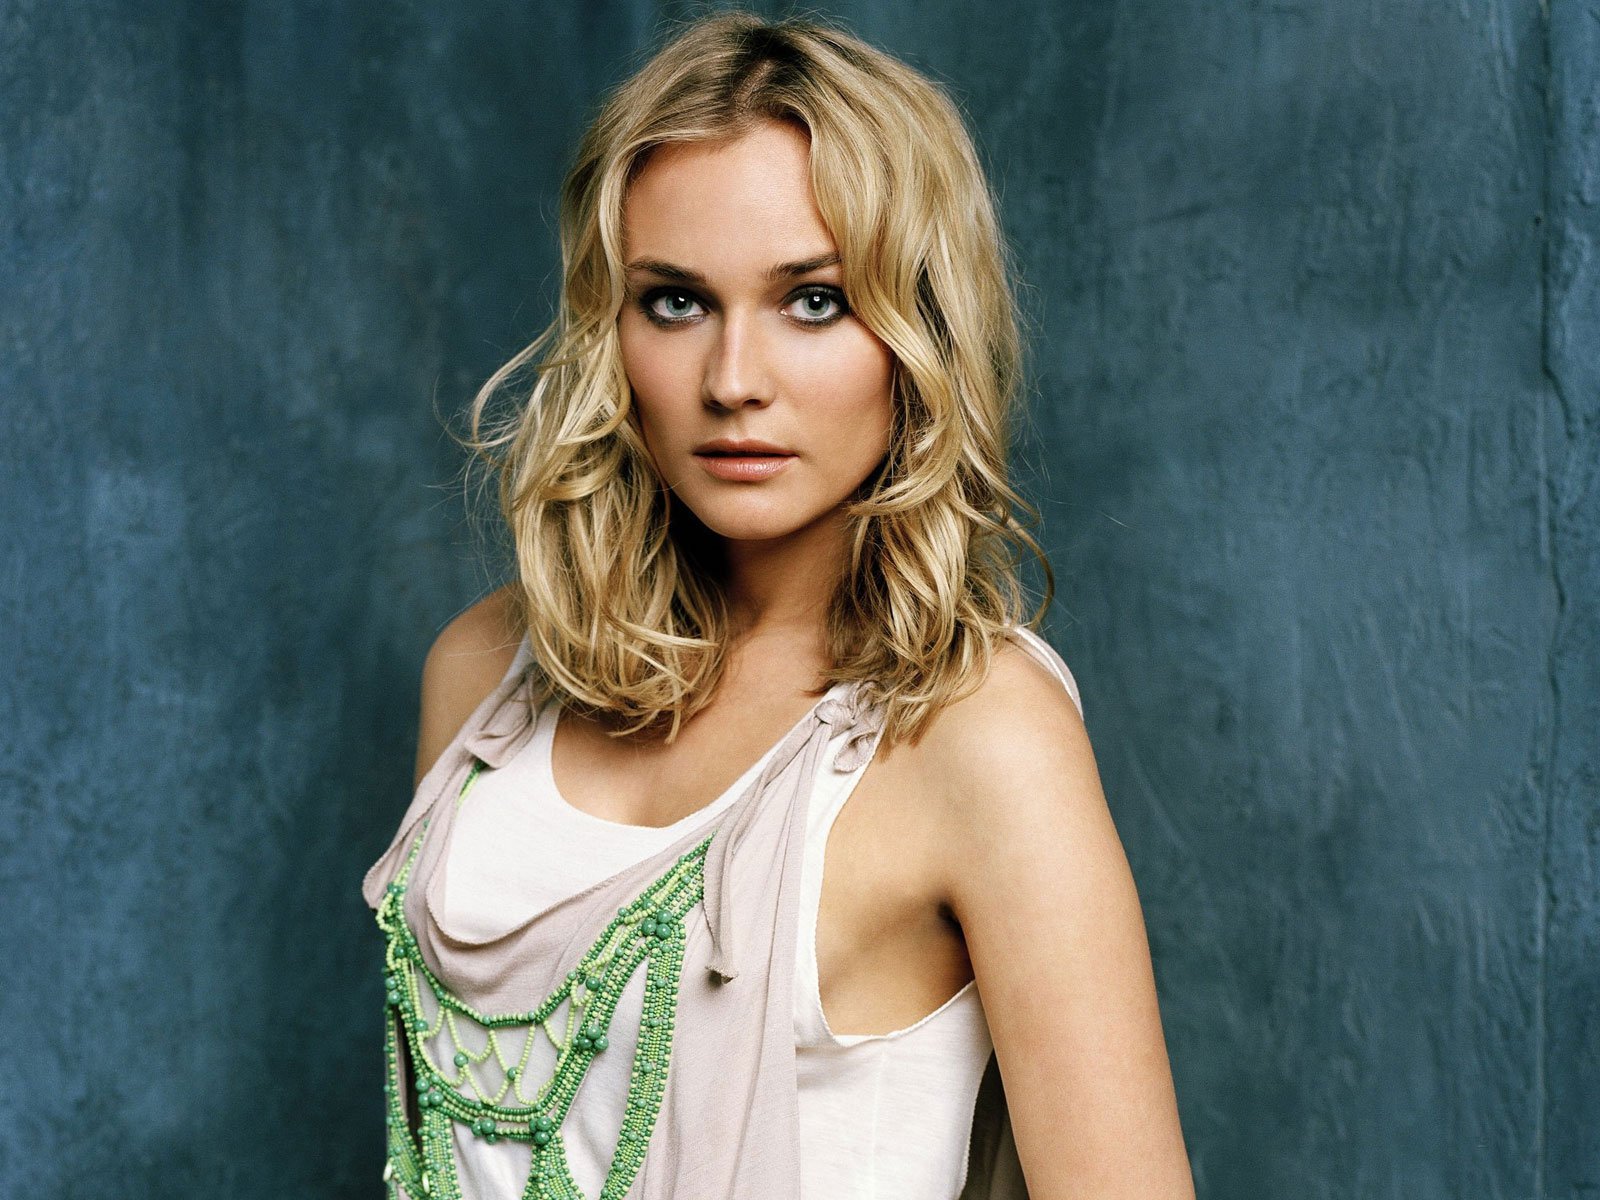 Diane Kruger photo 209 of 1759 pics, wallpaper - photo #489670 - ThePlace2